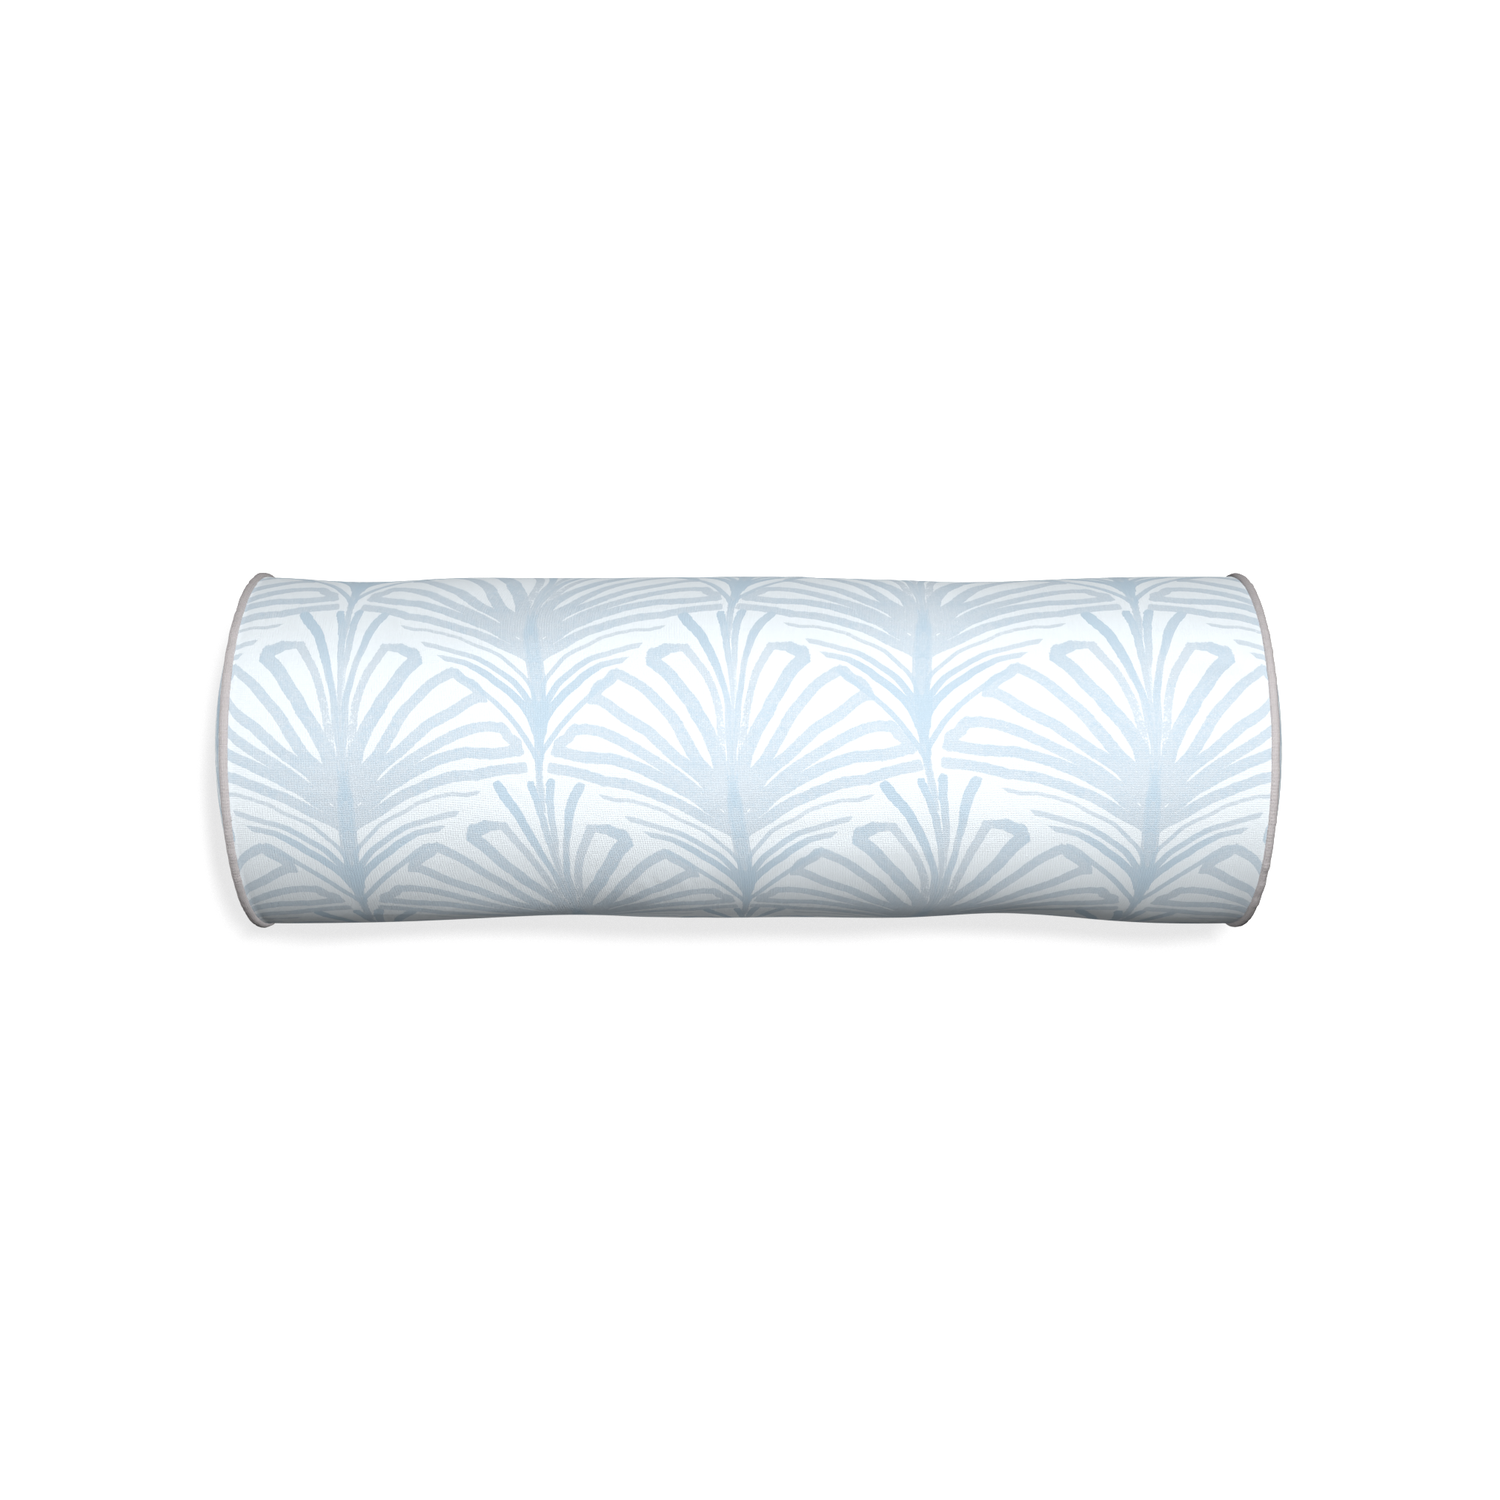 Bolster suzy sky custom pillow with pebble piping on white background